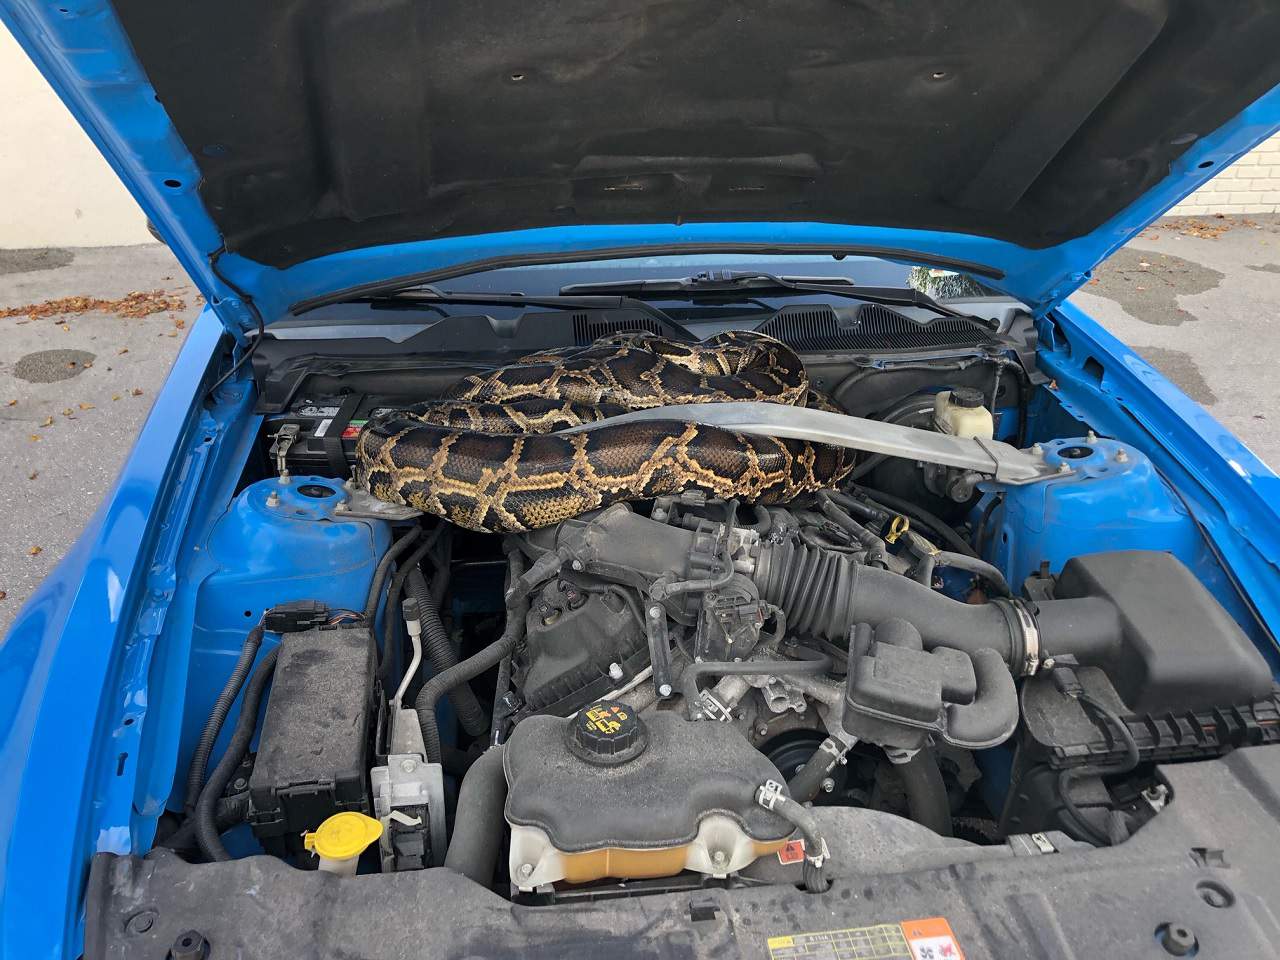 10-foot python removed from under car hood in Dania Beach